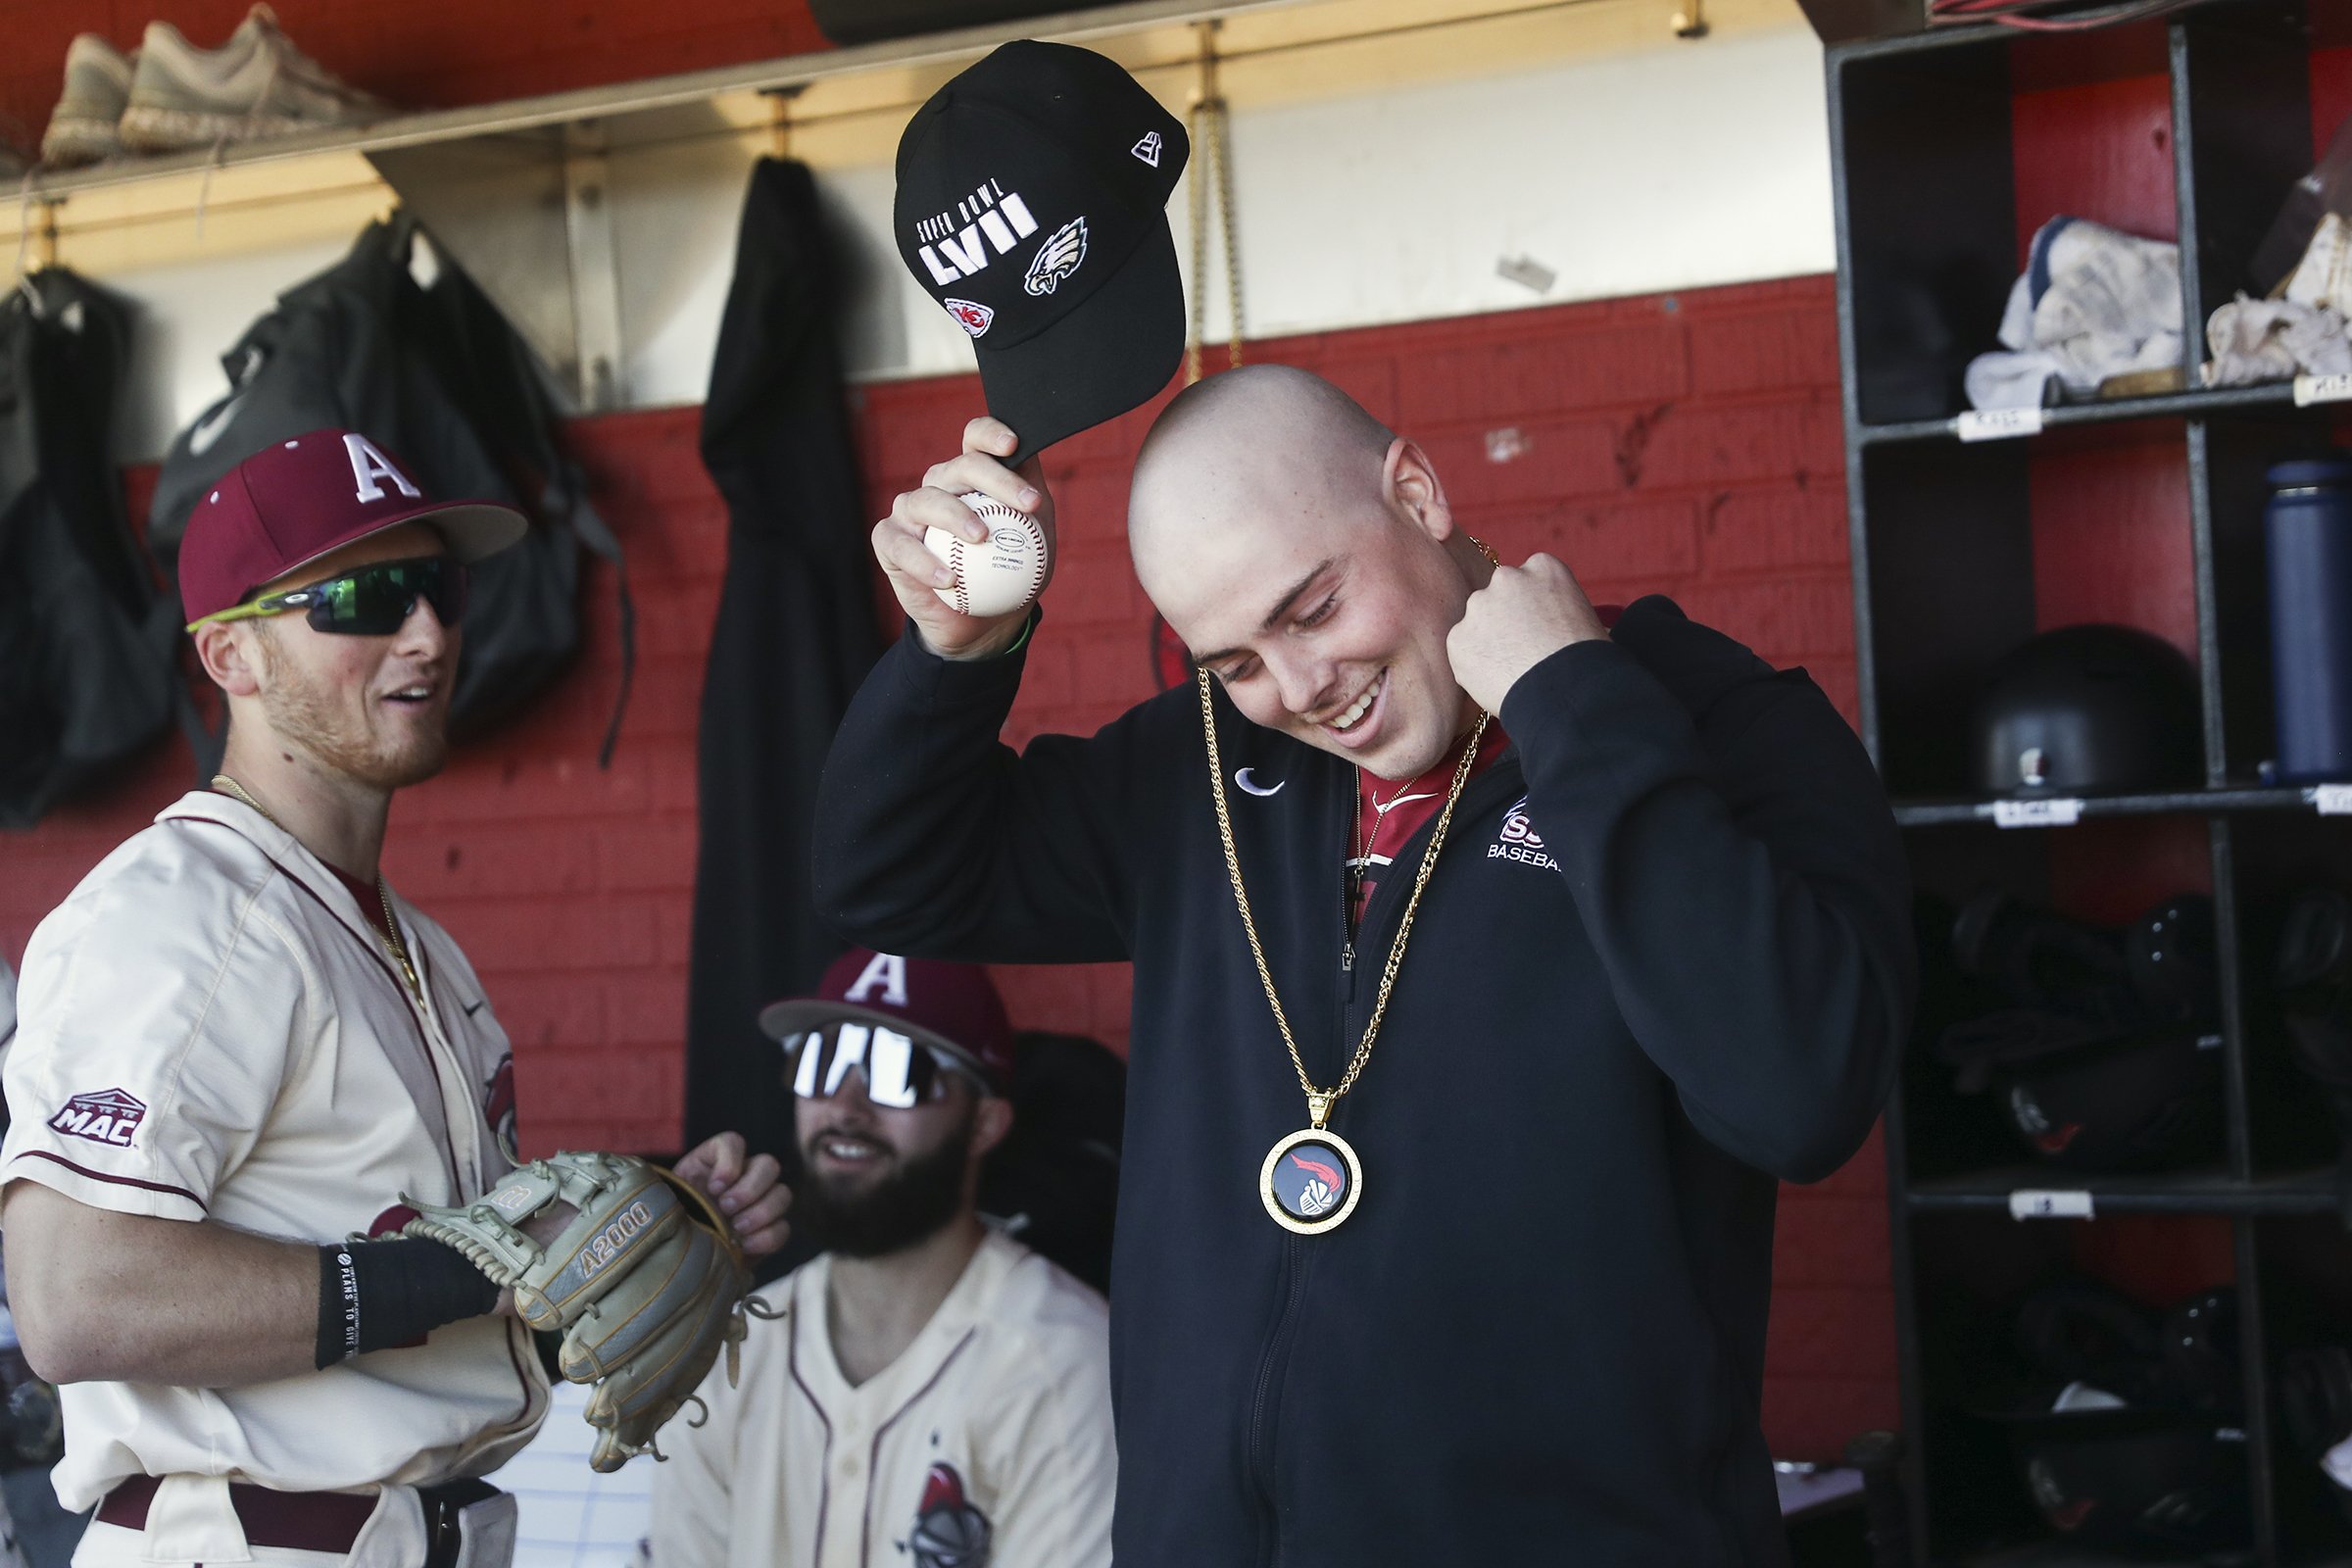  Luke Smith smiles while putting on a chain he received from Alex Madera, left, in the Arcadia dugout before their season-opener against Ursinus at Skip Wilson Field in Ambler, Pa. on Feb. 23, 2023. Luke Smith had hopes to be drafted this summer as h